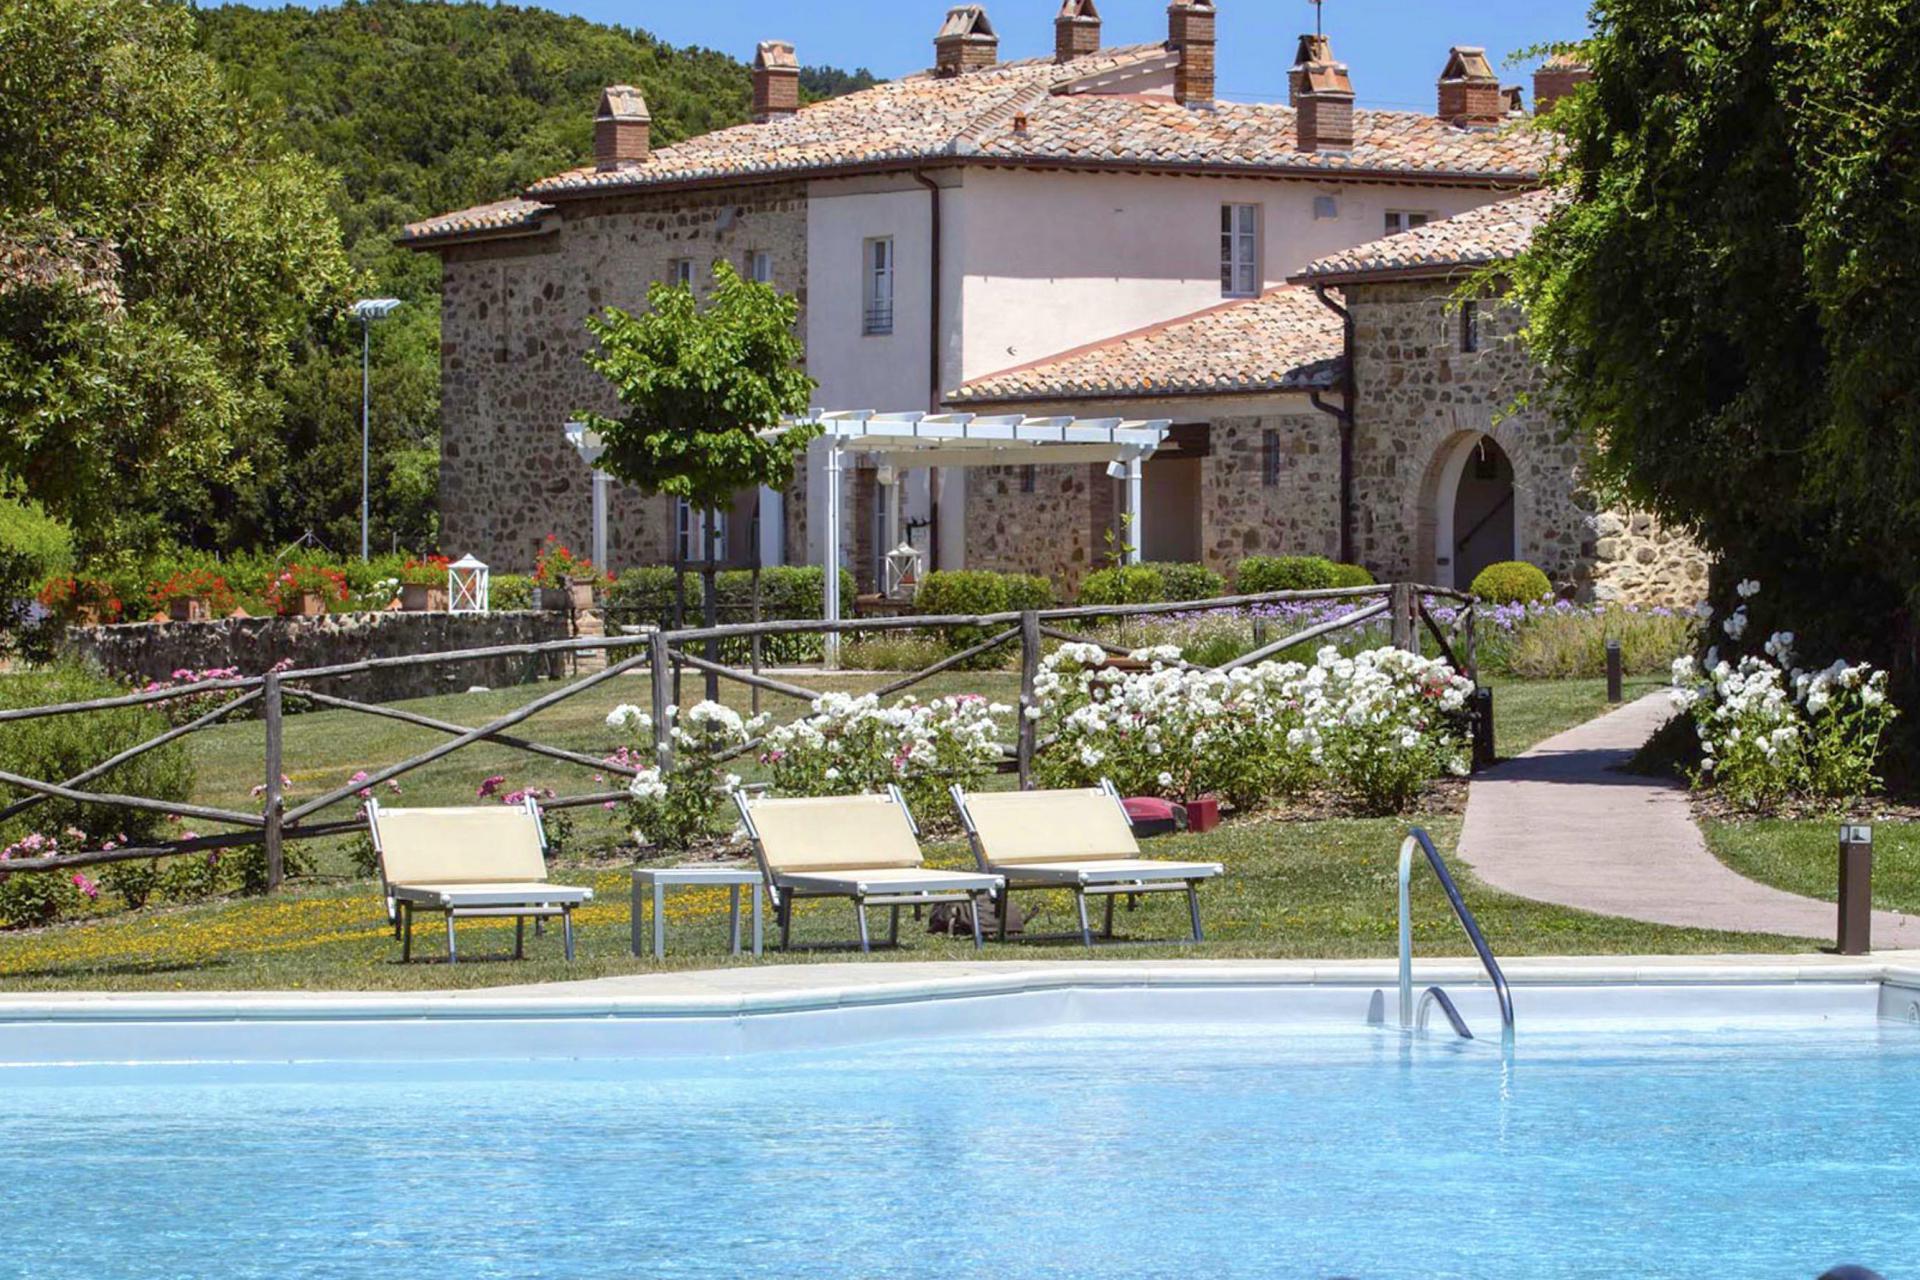 Elegant agriturismo with Tuscan dinners